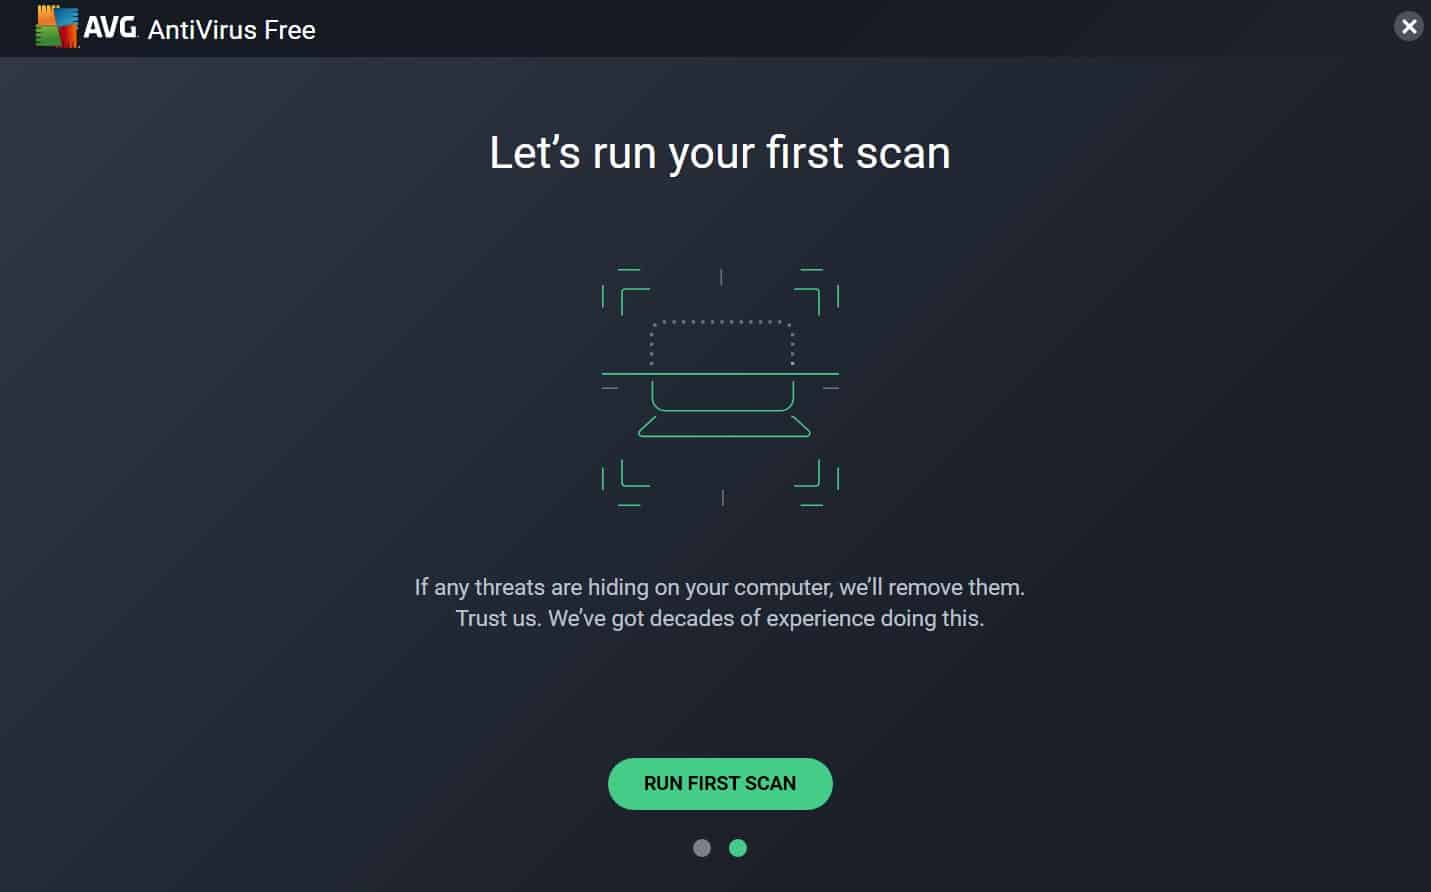 Run a full system scan using your preferred antivirus software.
If any malware is detected, follow the instructions provided by the antivirus program to remove it.